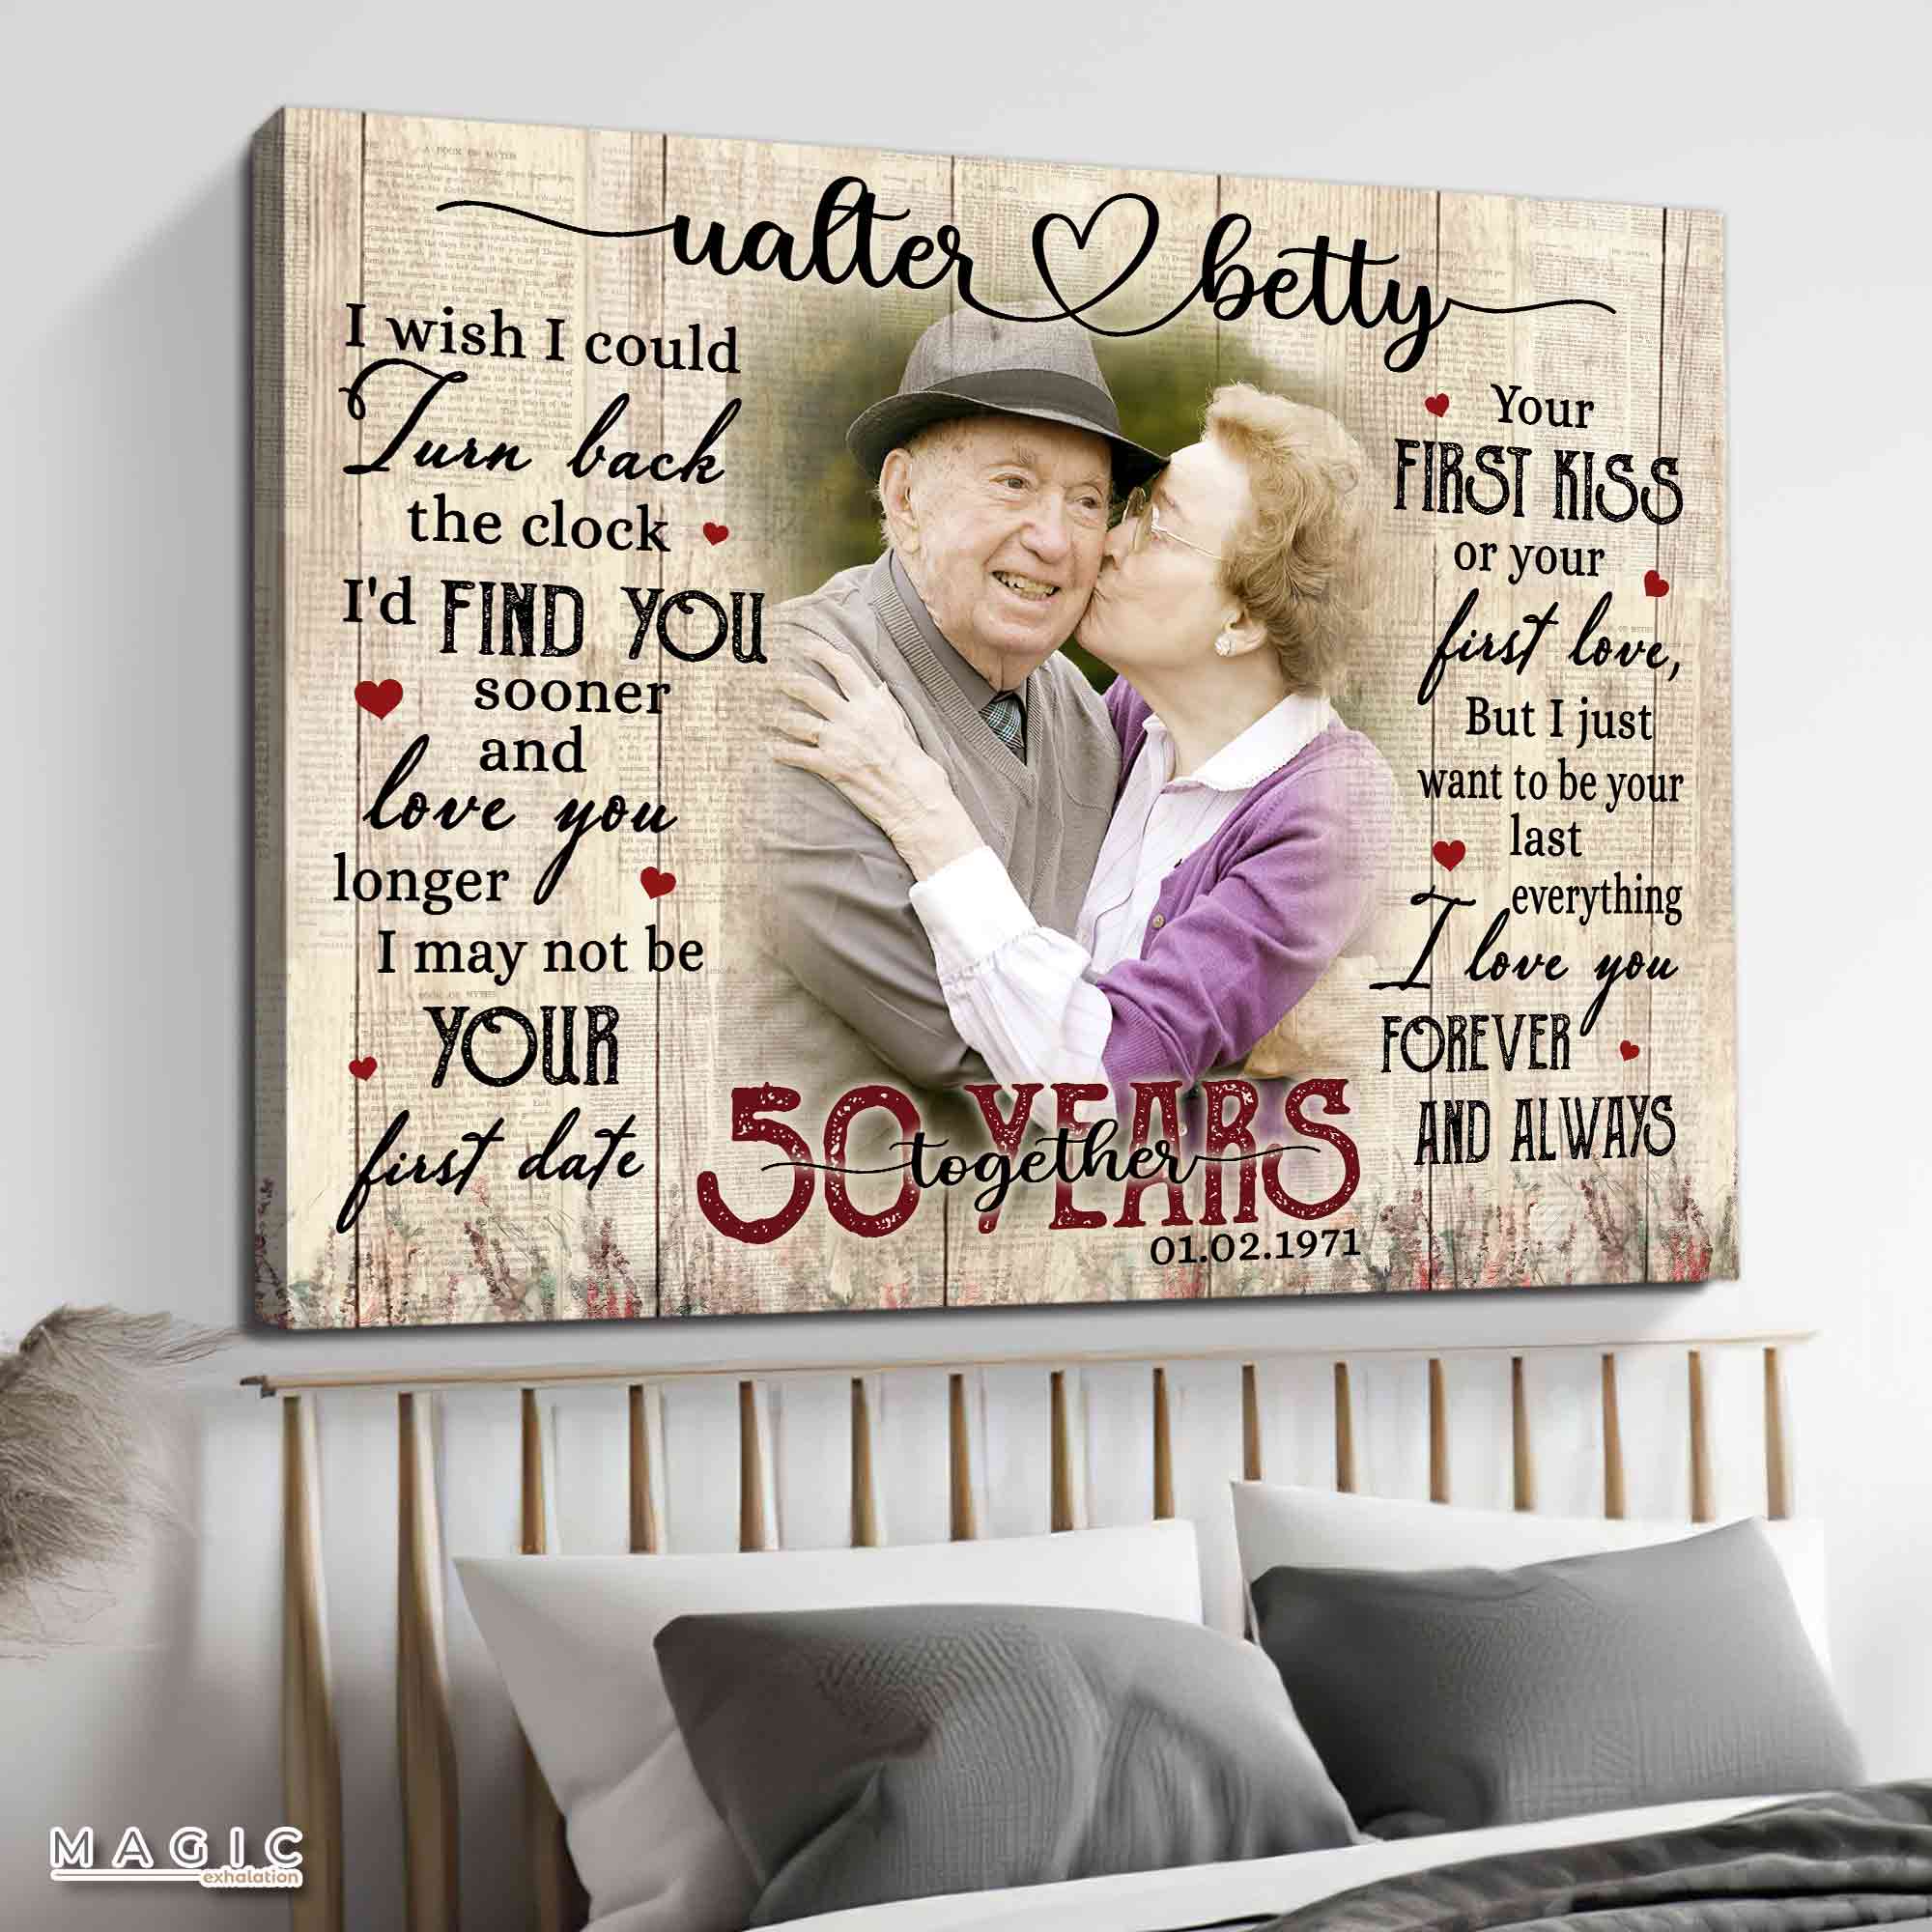 50 wedding anniversary gifts,50th anniversary gifts parents